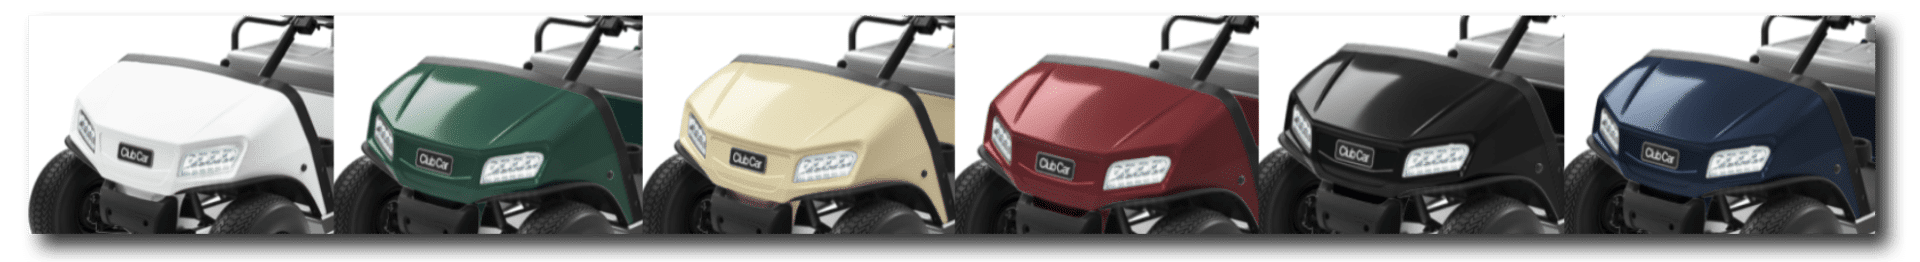 Club Car Villager Utility Vehicle Available Colors